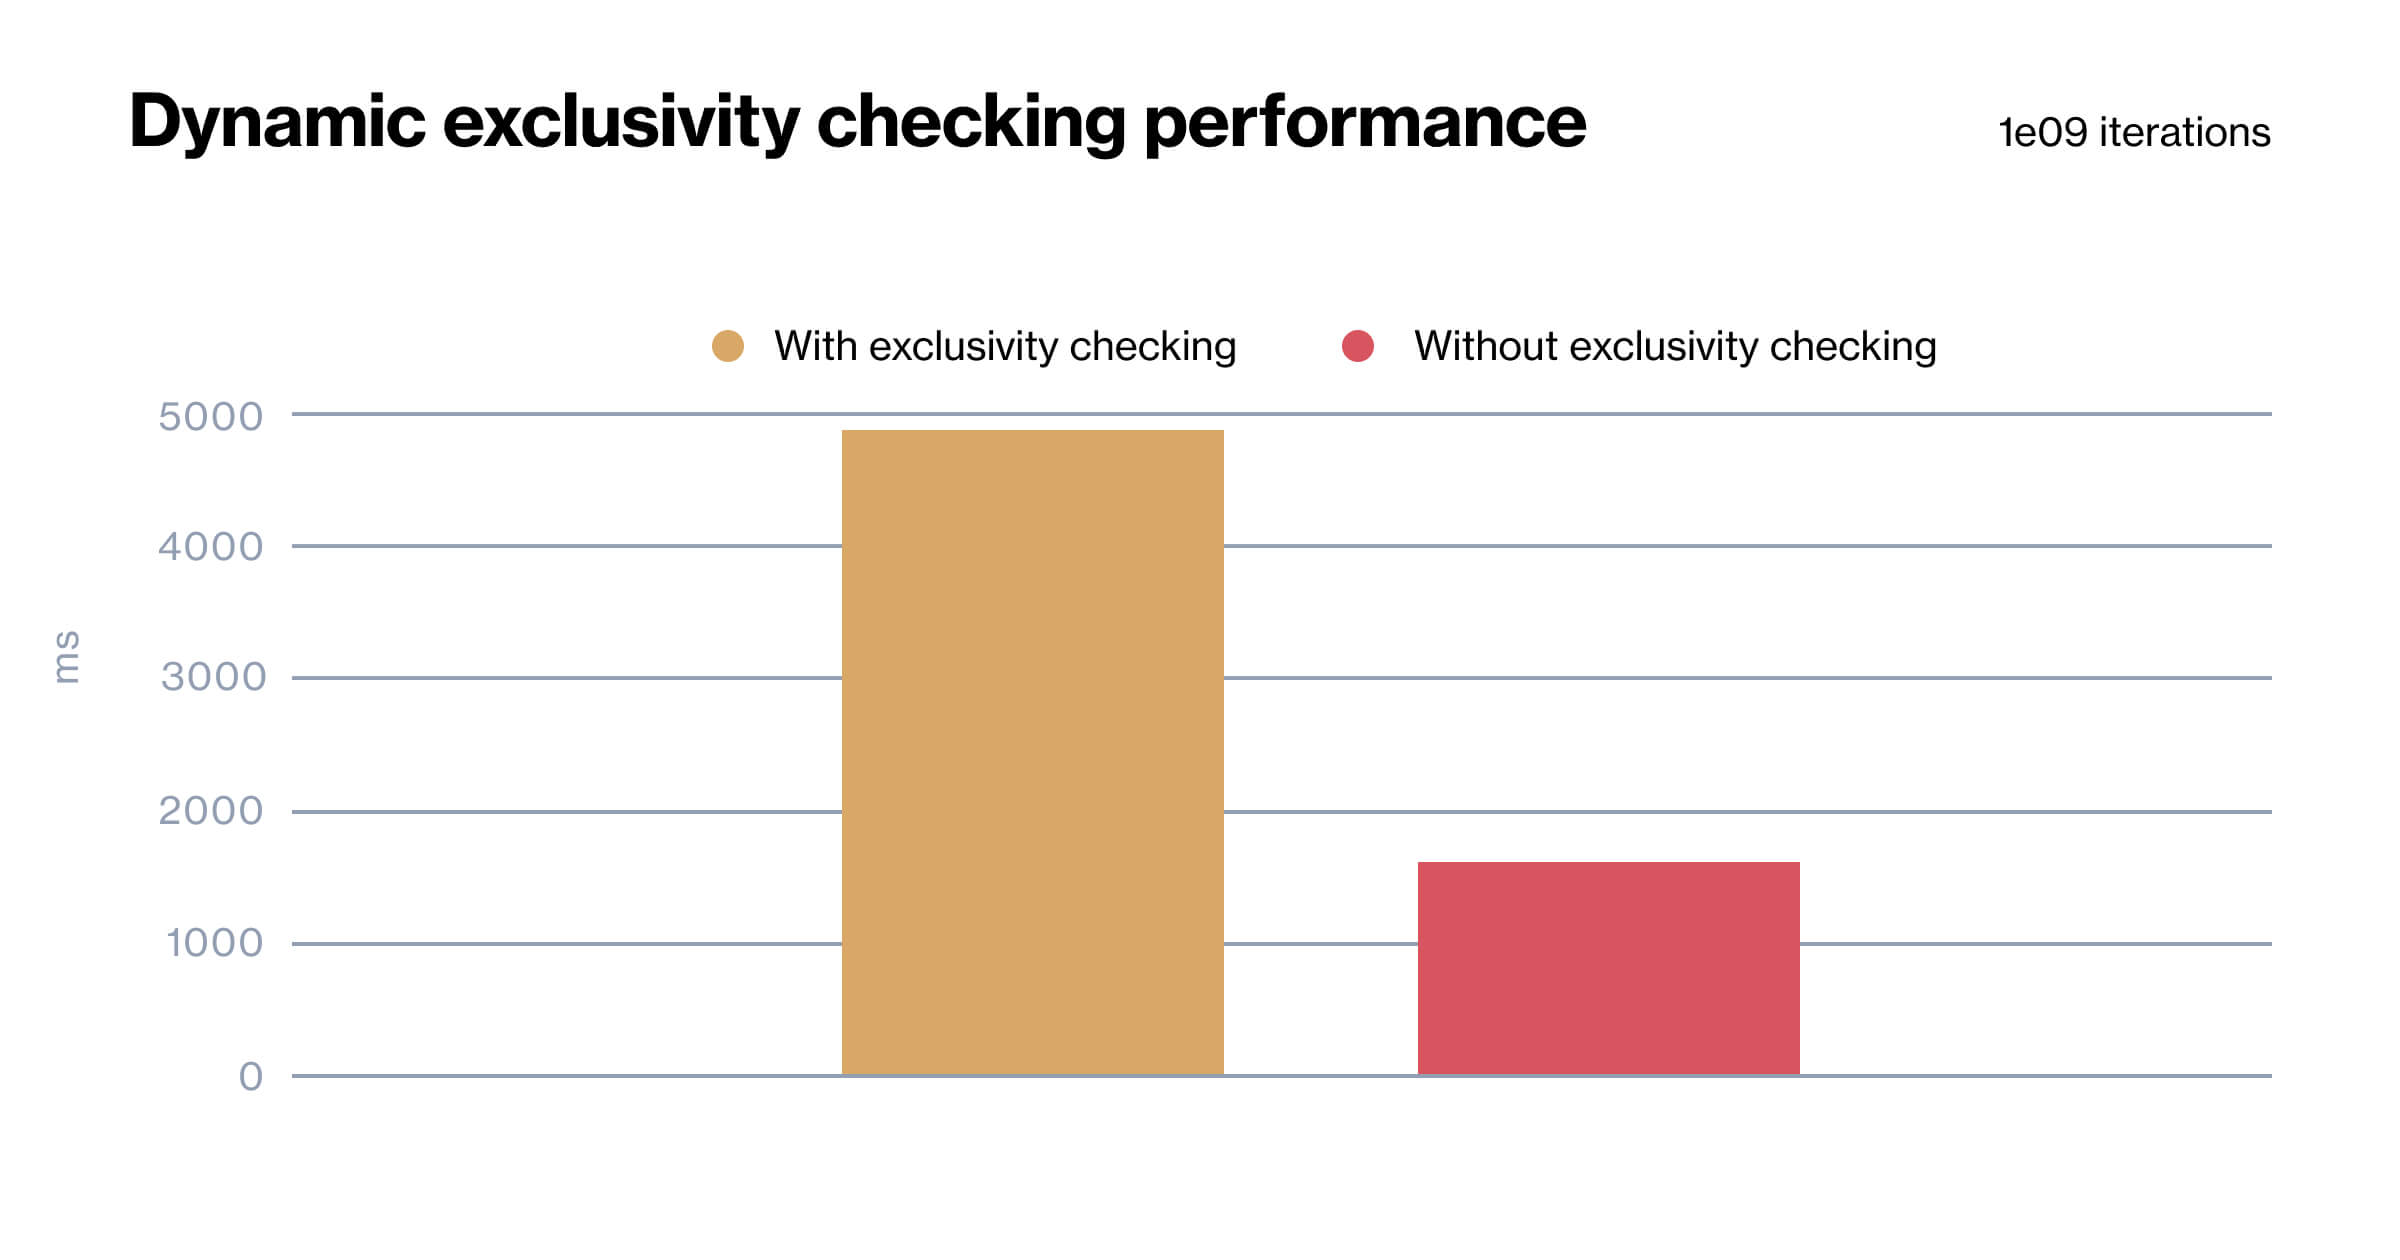 Bar chart displaying the difference in performance with exclusivity checking and without exclusivity checking.